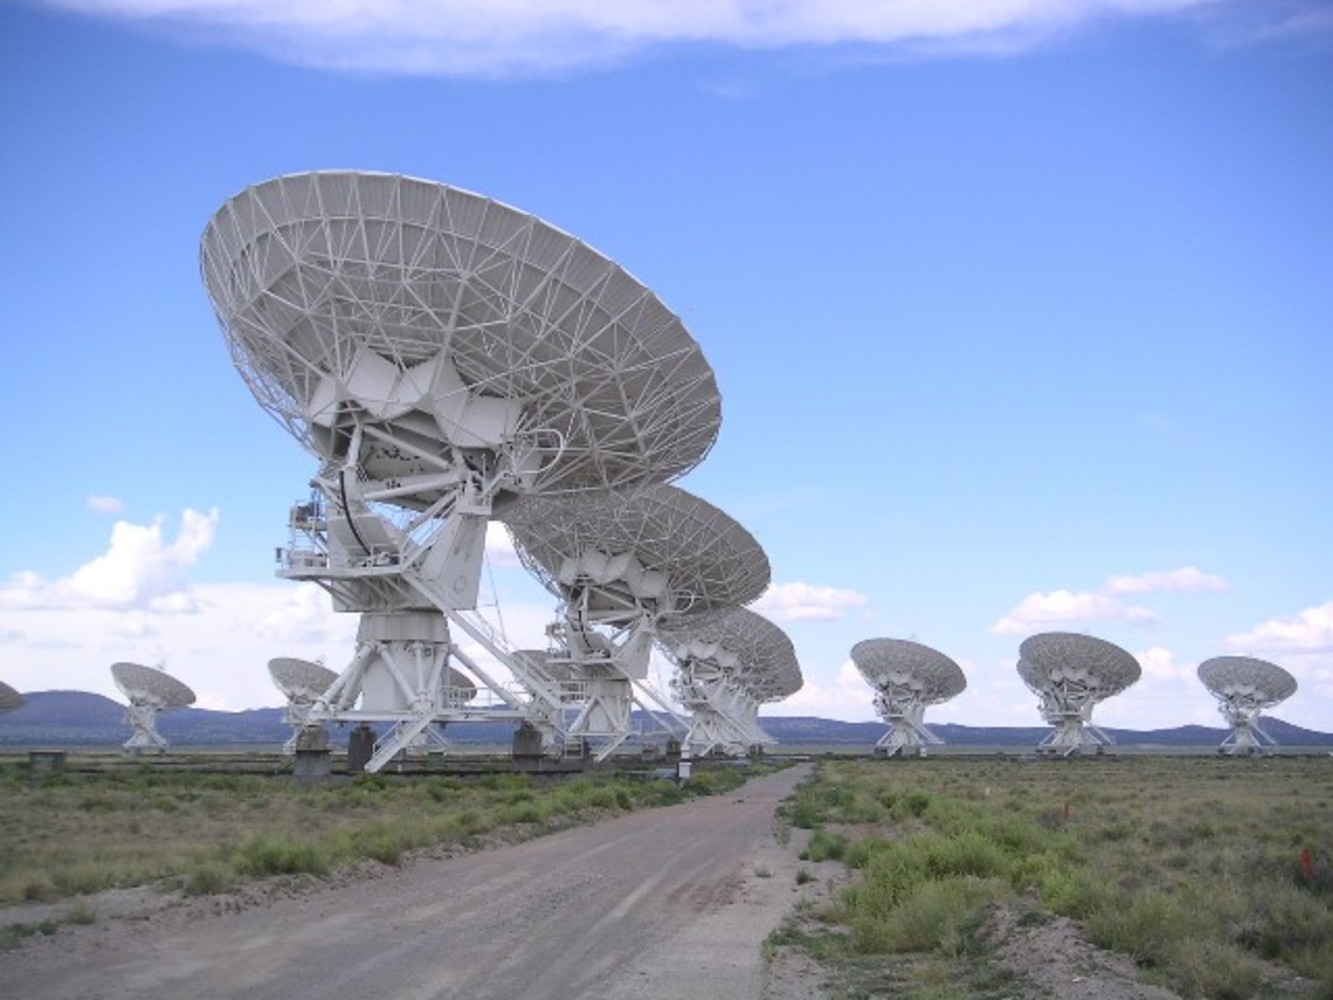 The Very Large Array at Socorro, New Mexico, United States.